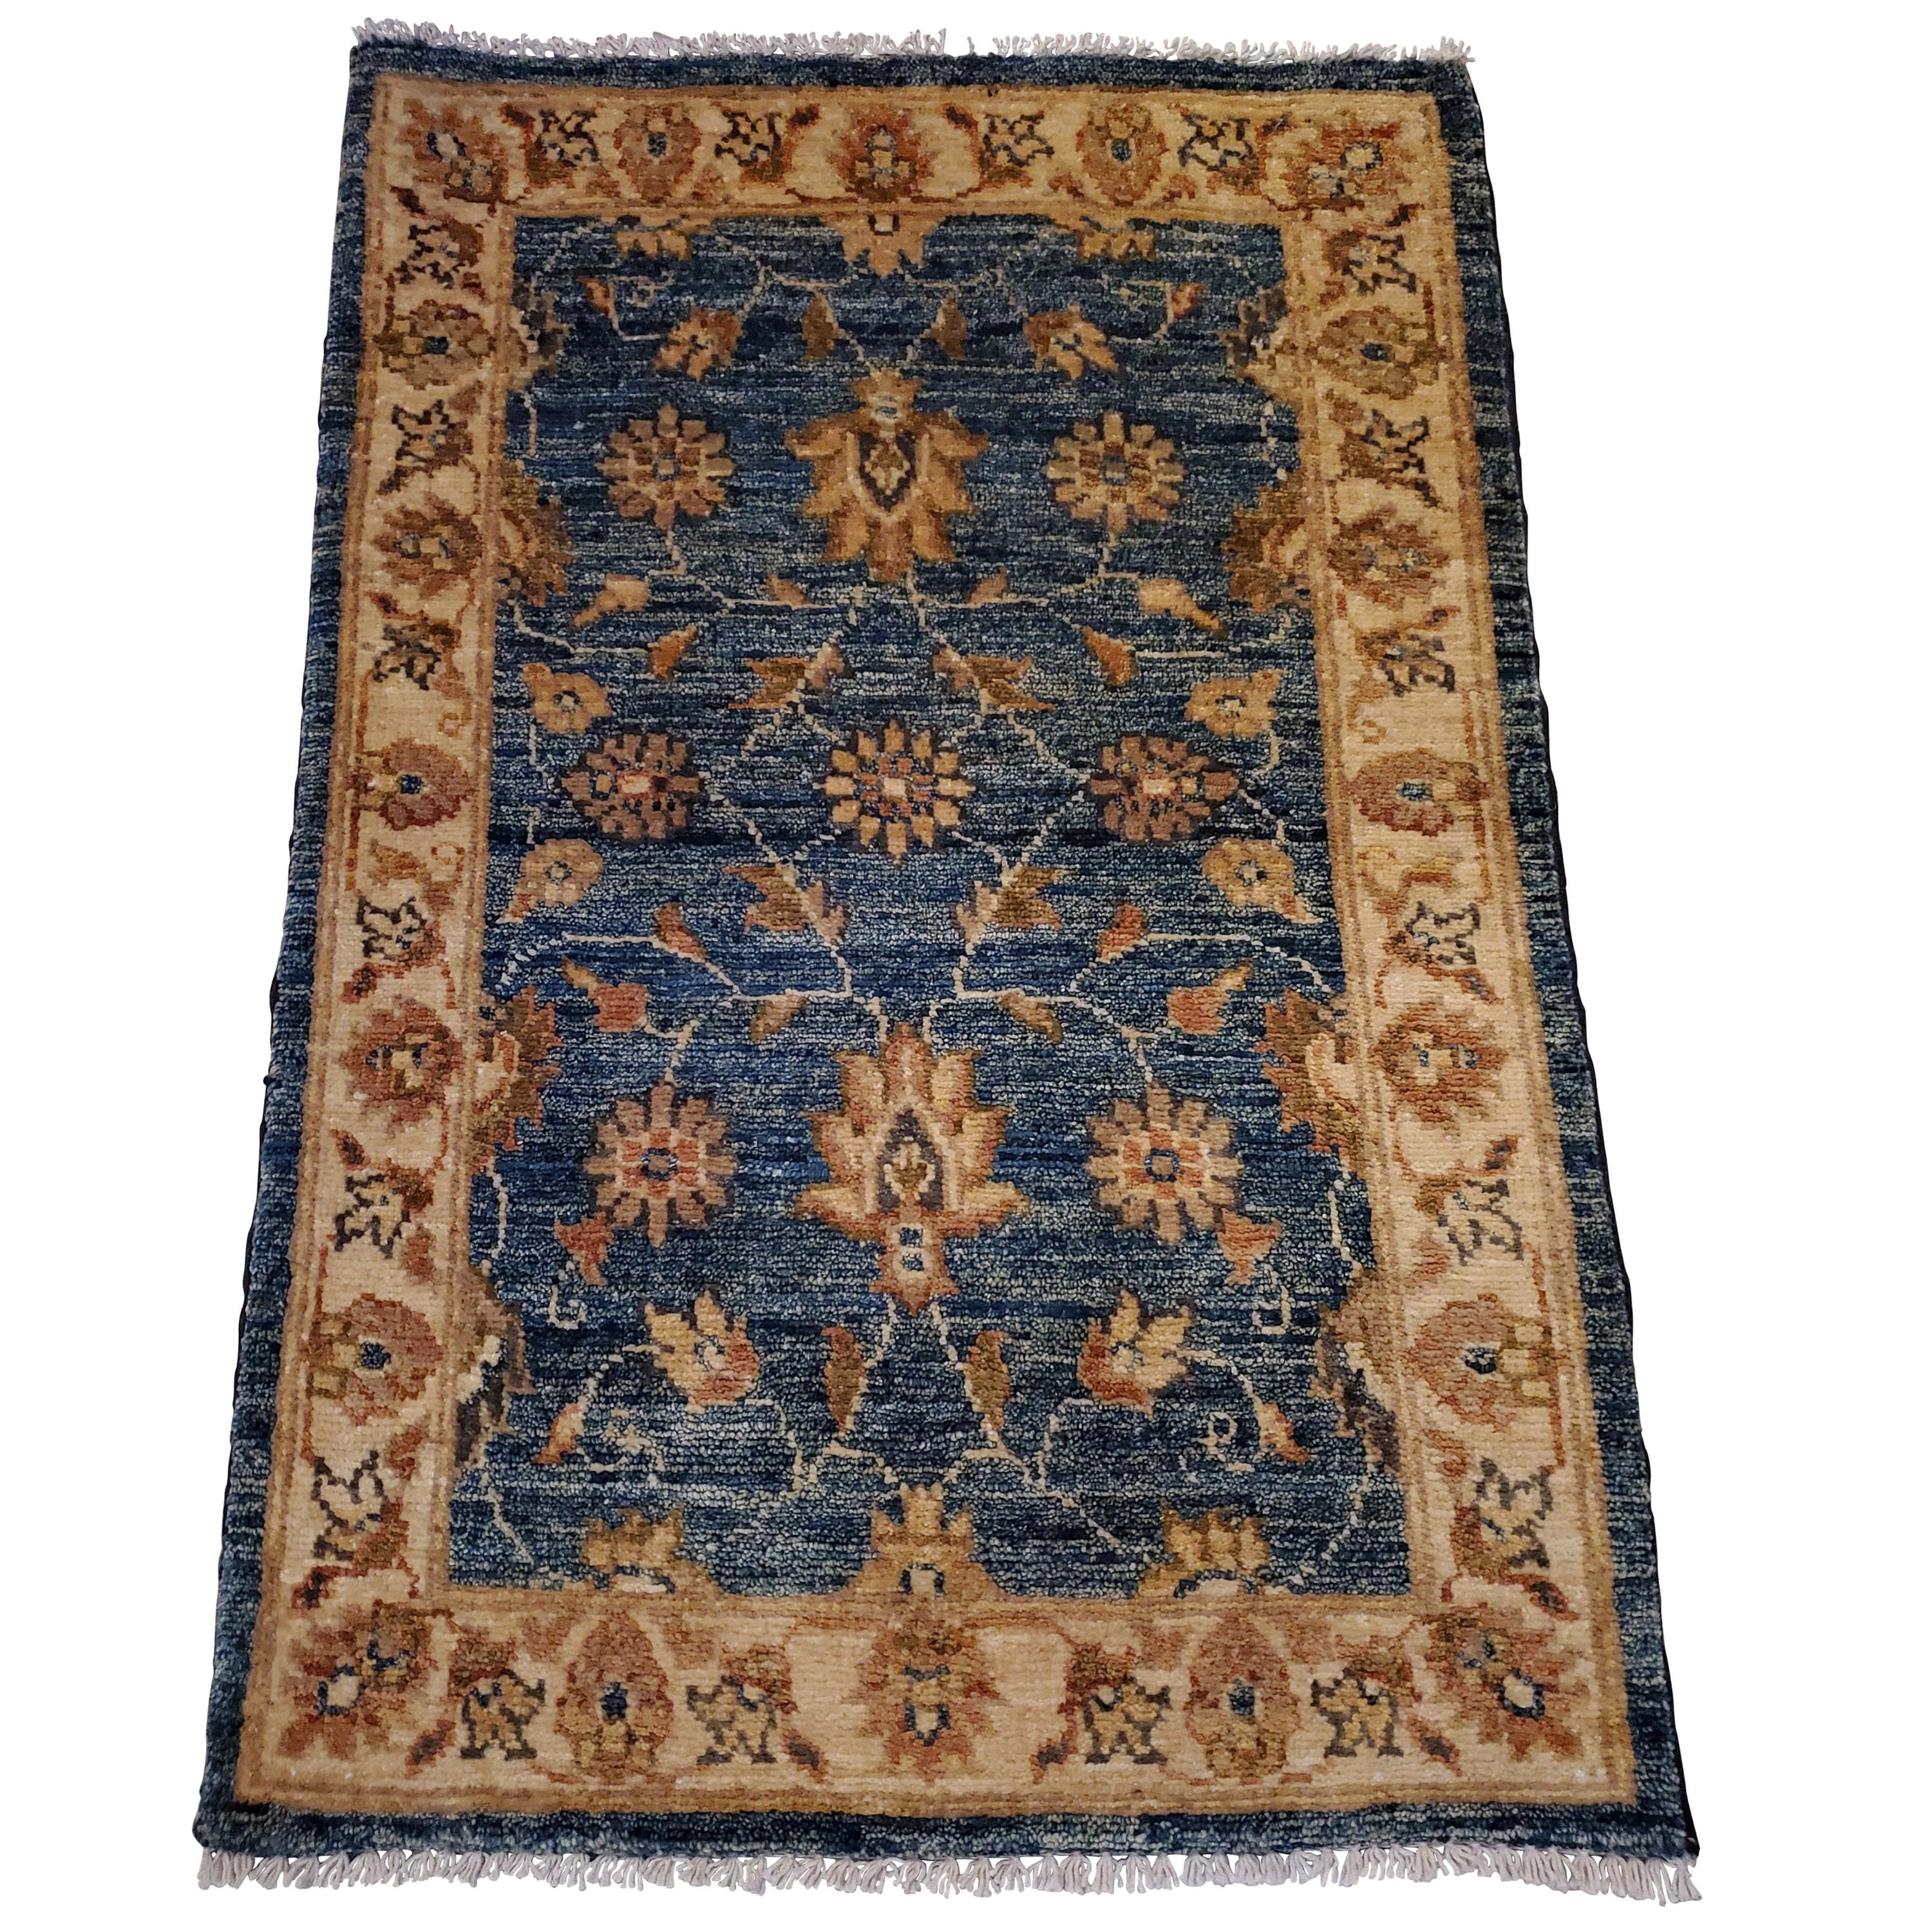 Medium Size Asian Area Rug, Colorful / 215 For Sale